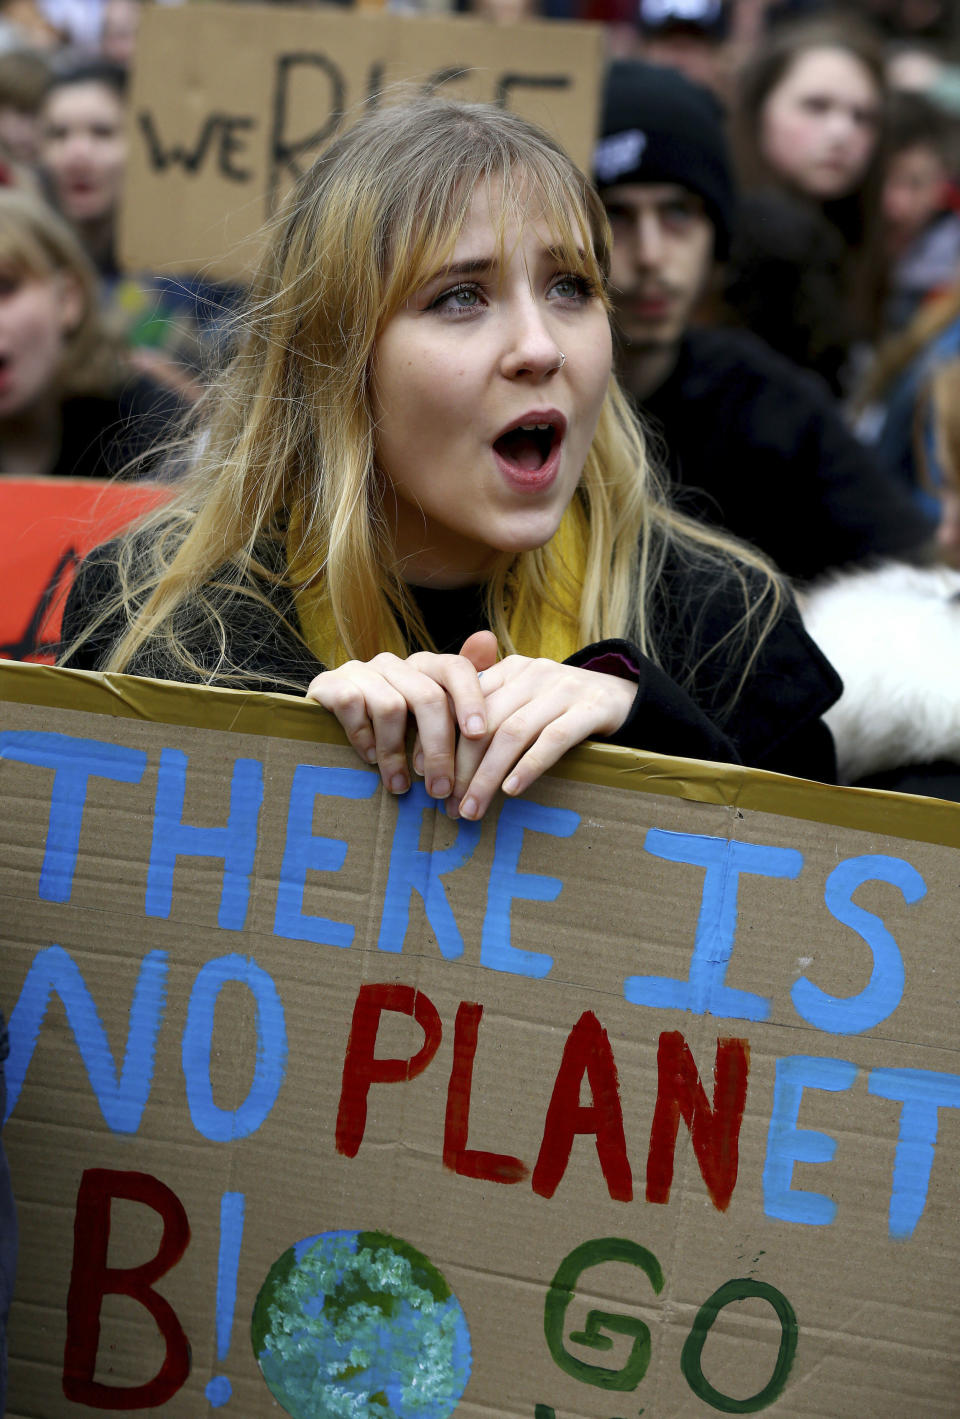 A young student takes part in a global school strike for climate change in Canterbury, south east England, Friday March 15, 2019. Students mobilized by word of mouth and social media skipped class Friday to protest what they believe are their governments’ failure to take though action against global warming. (Gareth Fuller/PA via AP)